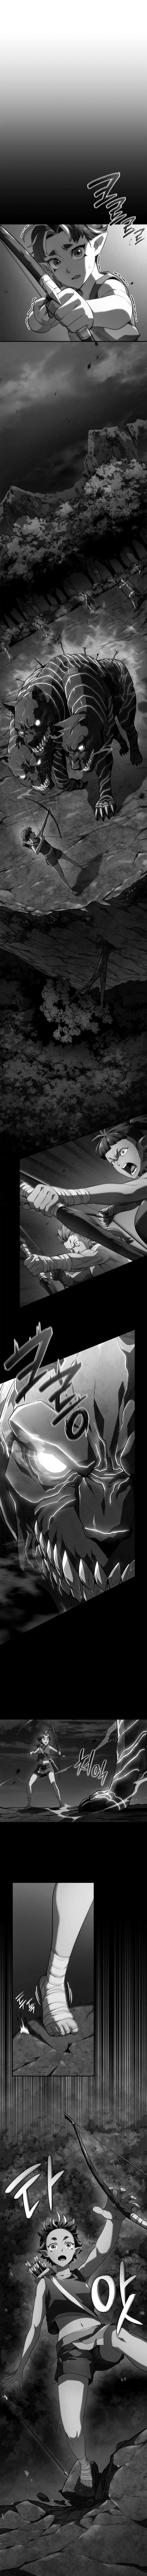 Revenge of the Iron-Blooded Sword Hound Chapter 50 page 2